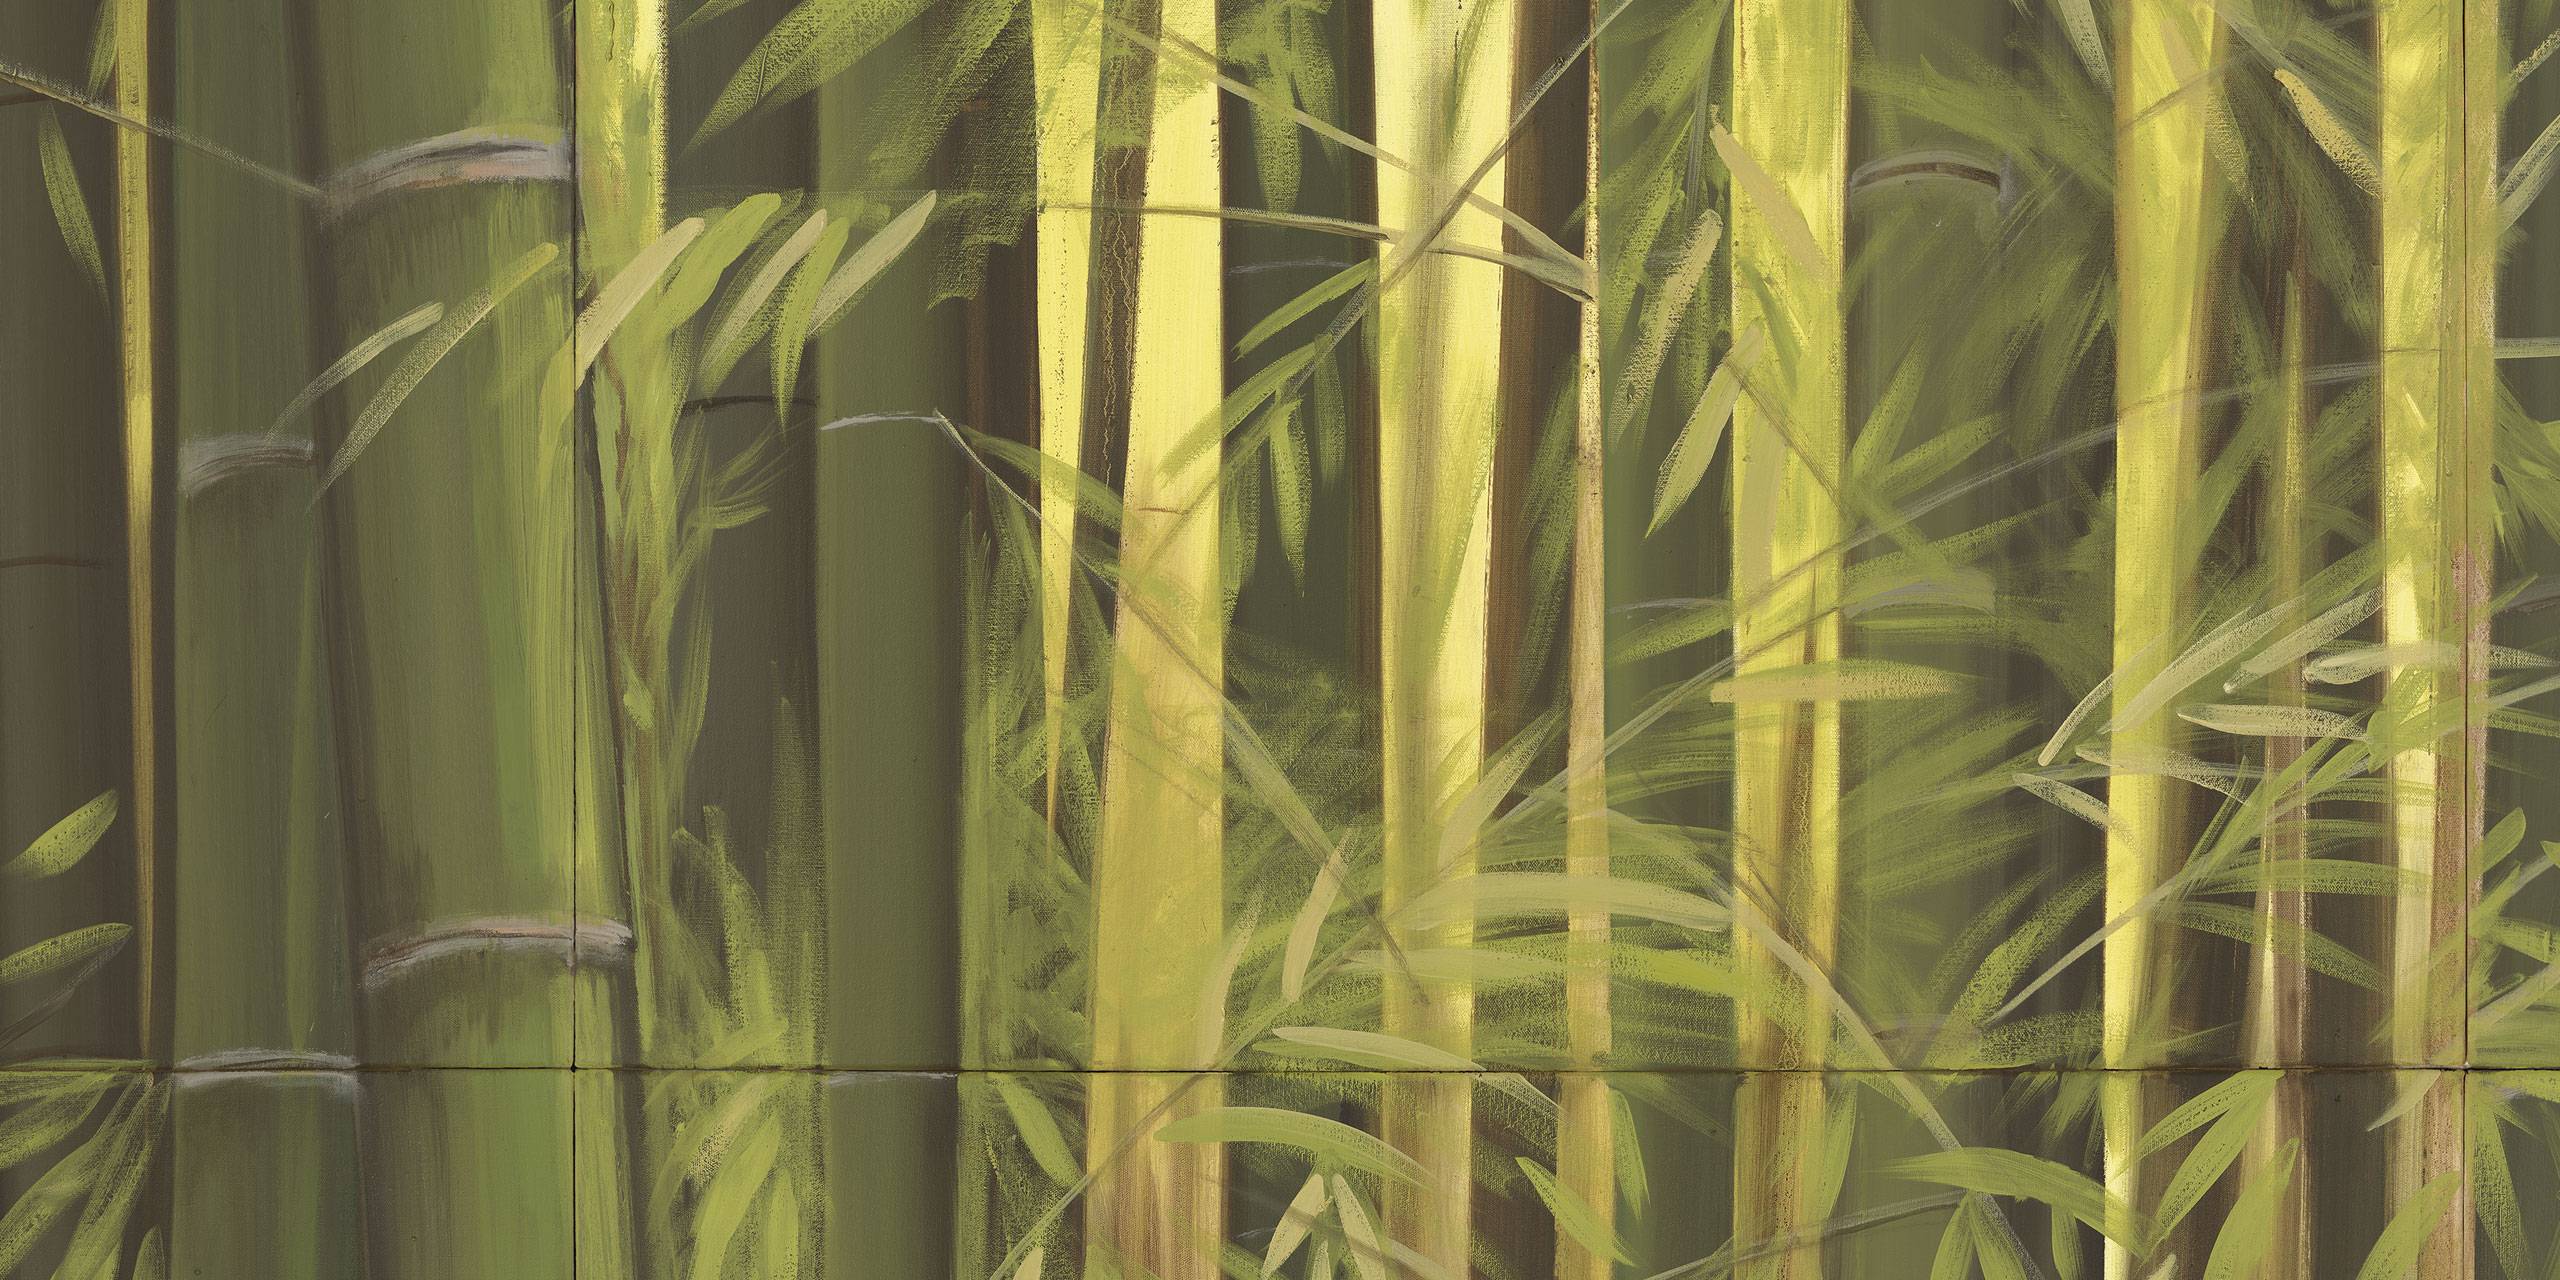 Lessons Of The Bamboo